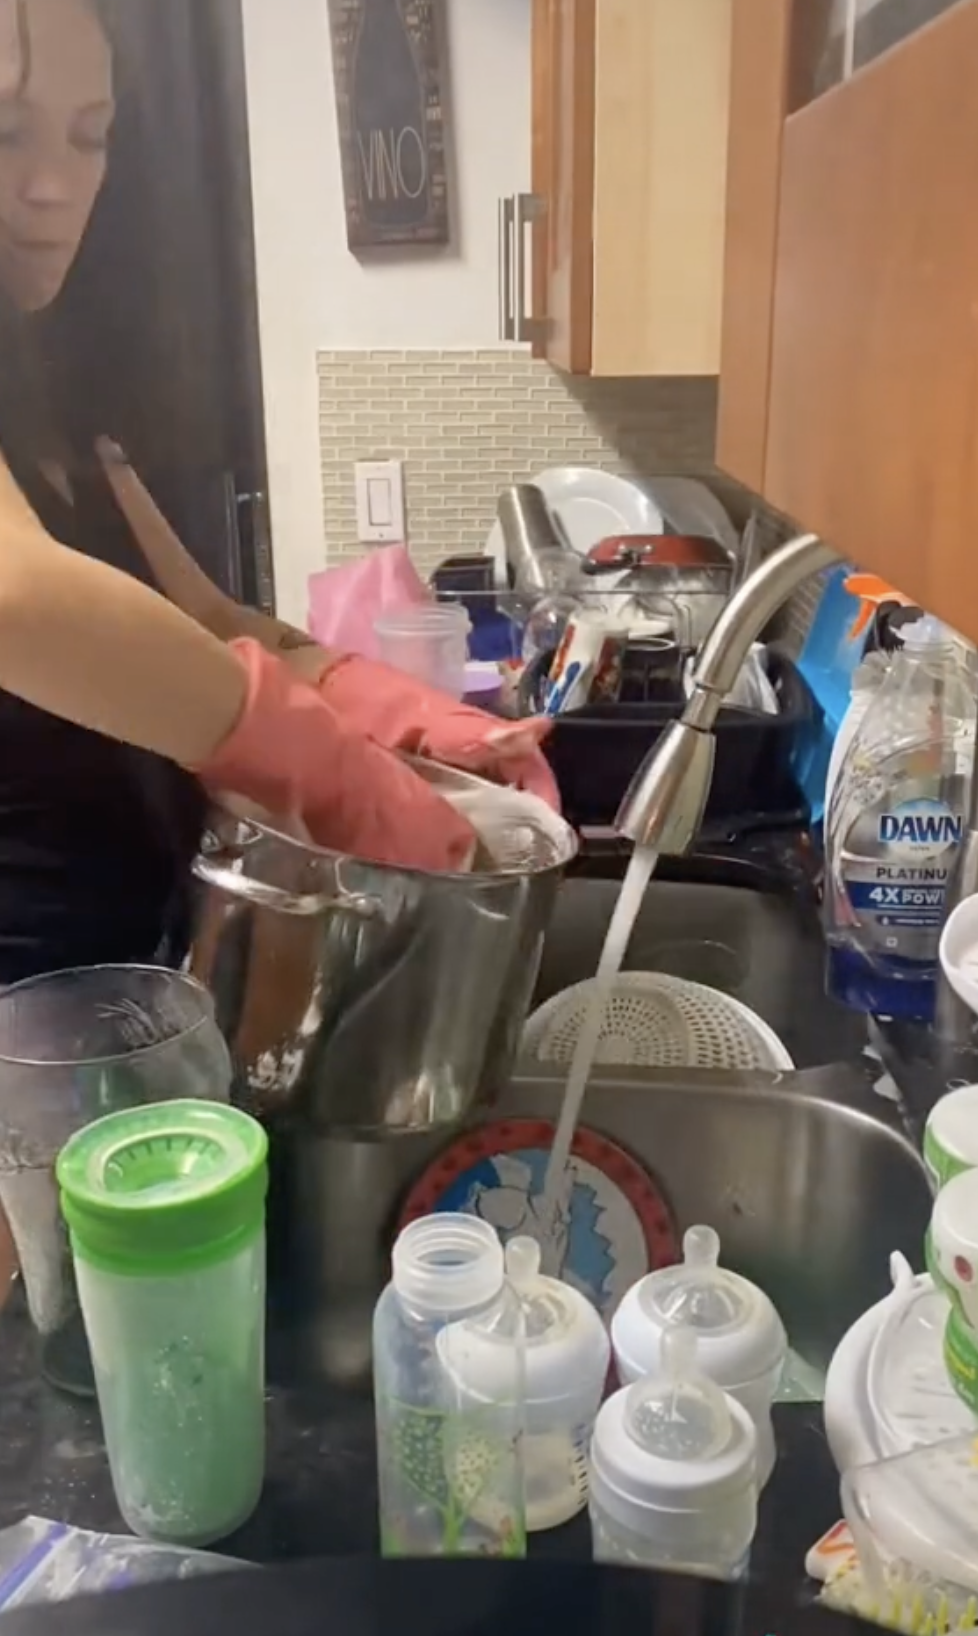 Sierra Nicole is pictured washing the dishes. | Source: tiktok.com/@sierra_not_ciara